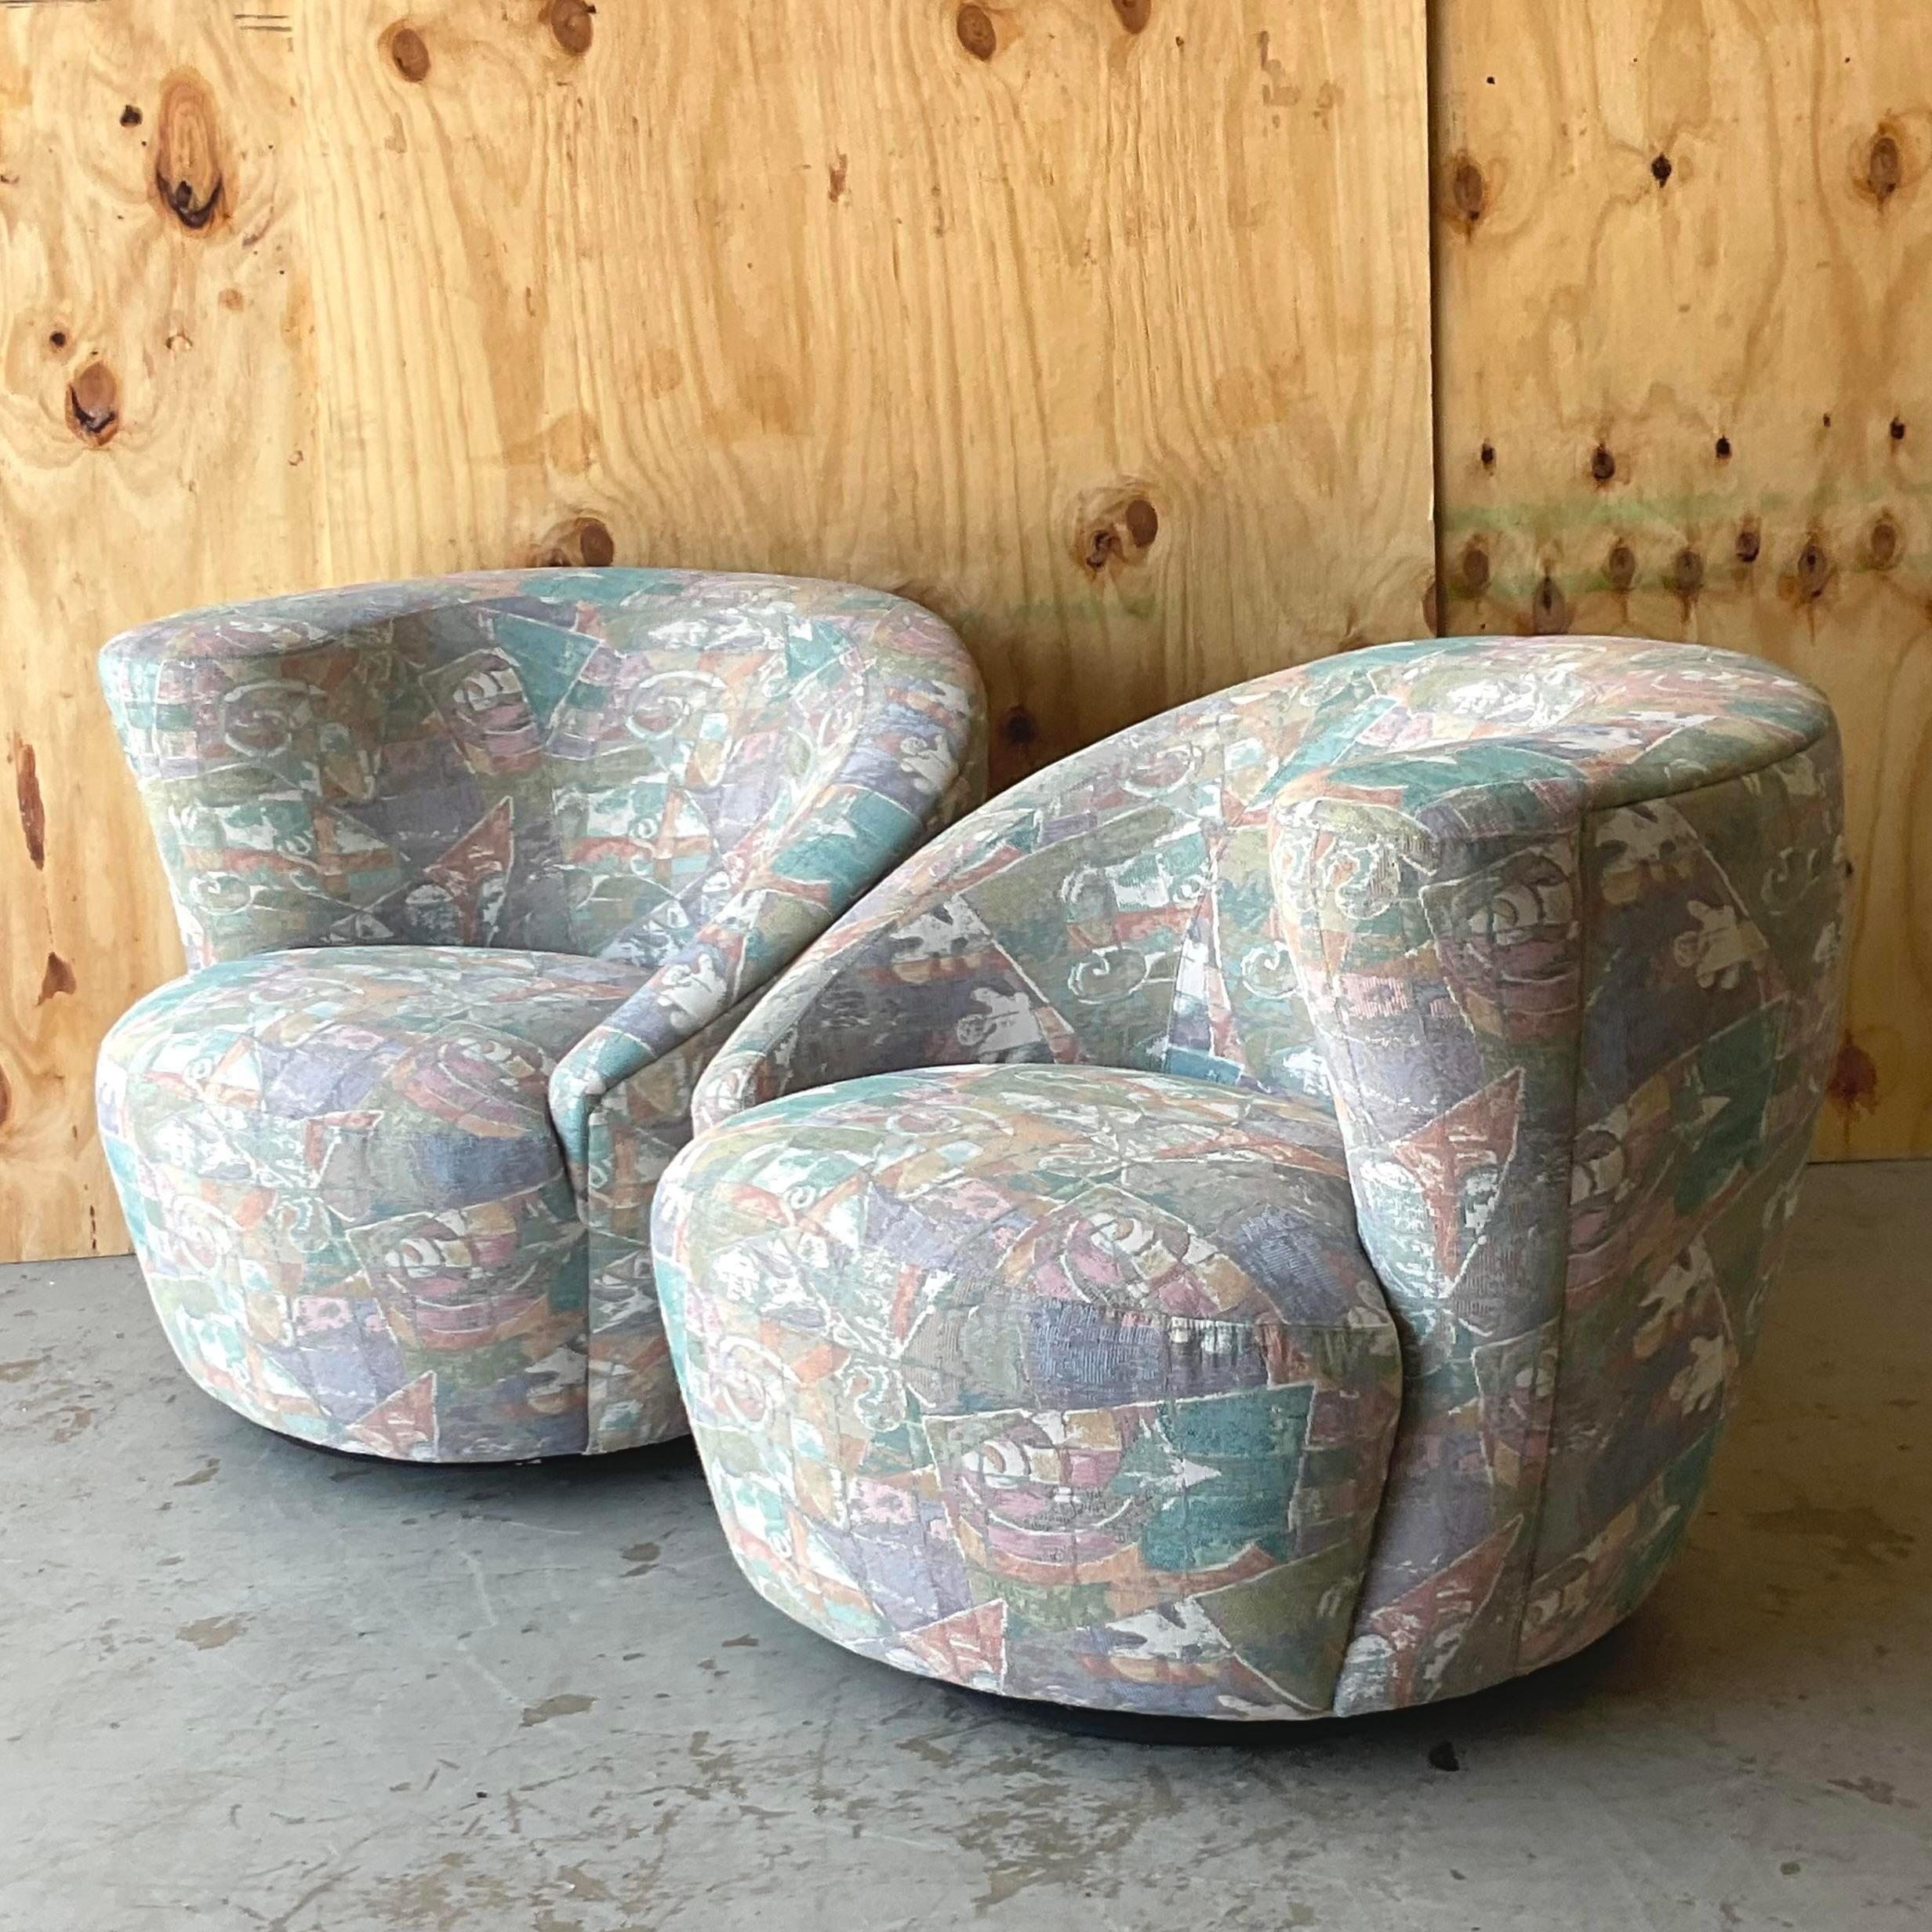 An incredible pair of vintage Boho swivel chairs. Made by the iconic Weiman group and tagged on the bottom. The coveted an auto duo shape in a pale jacquard upholstery. Two sets (four total) available on my page. Acquired from a Palm Beach estate. 